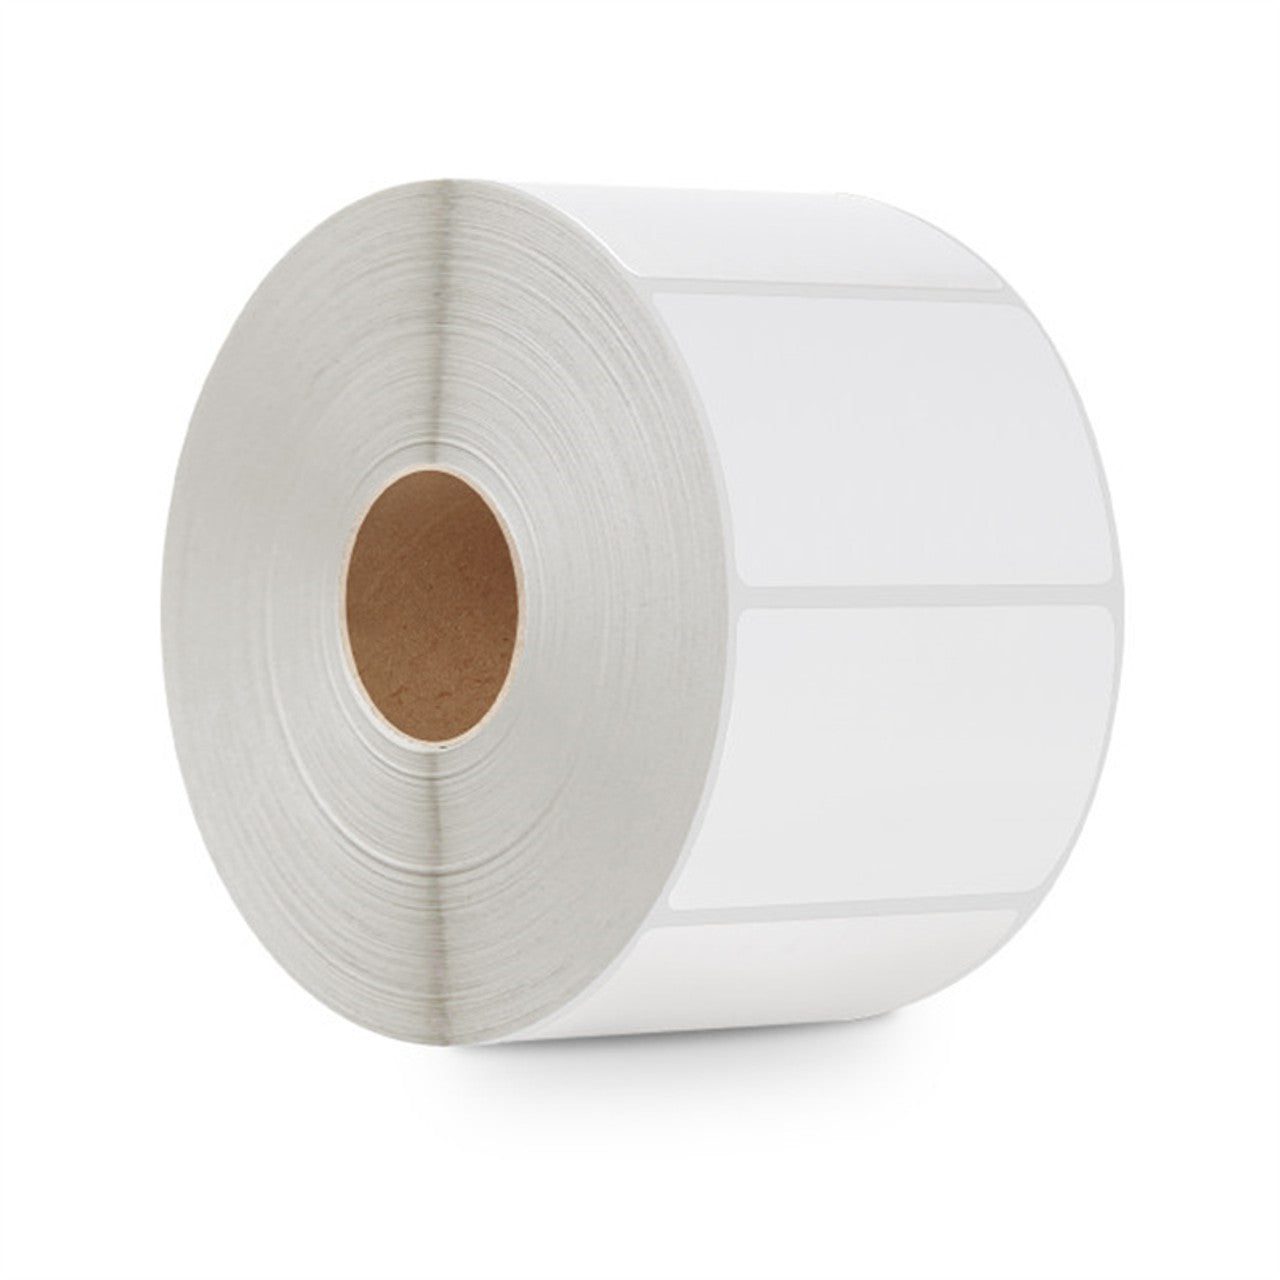 2.25" x 1.25" Thermal Roll Labels-800/Roll